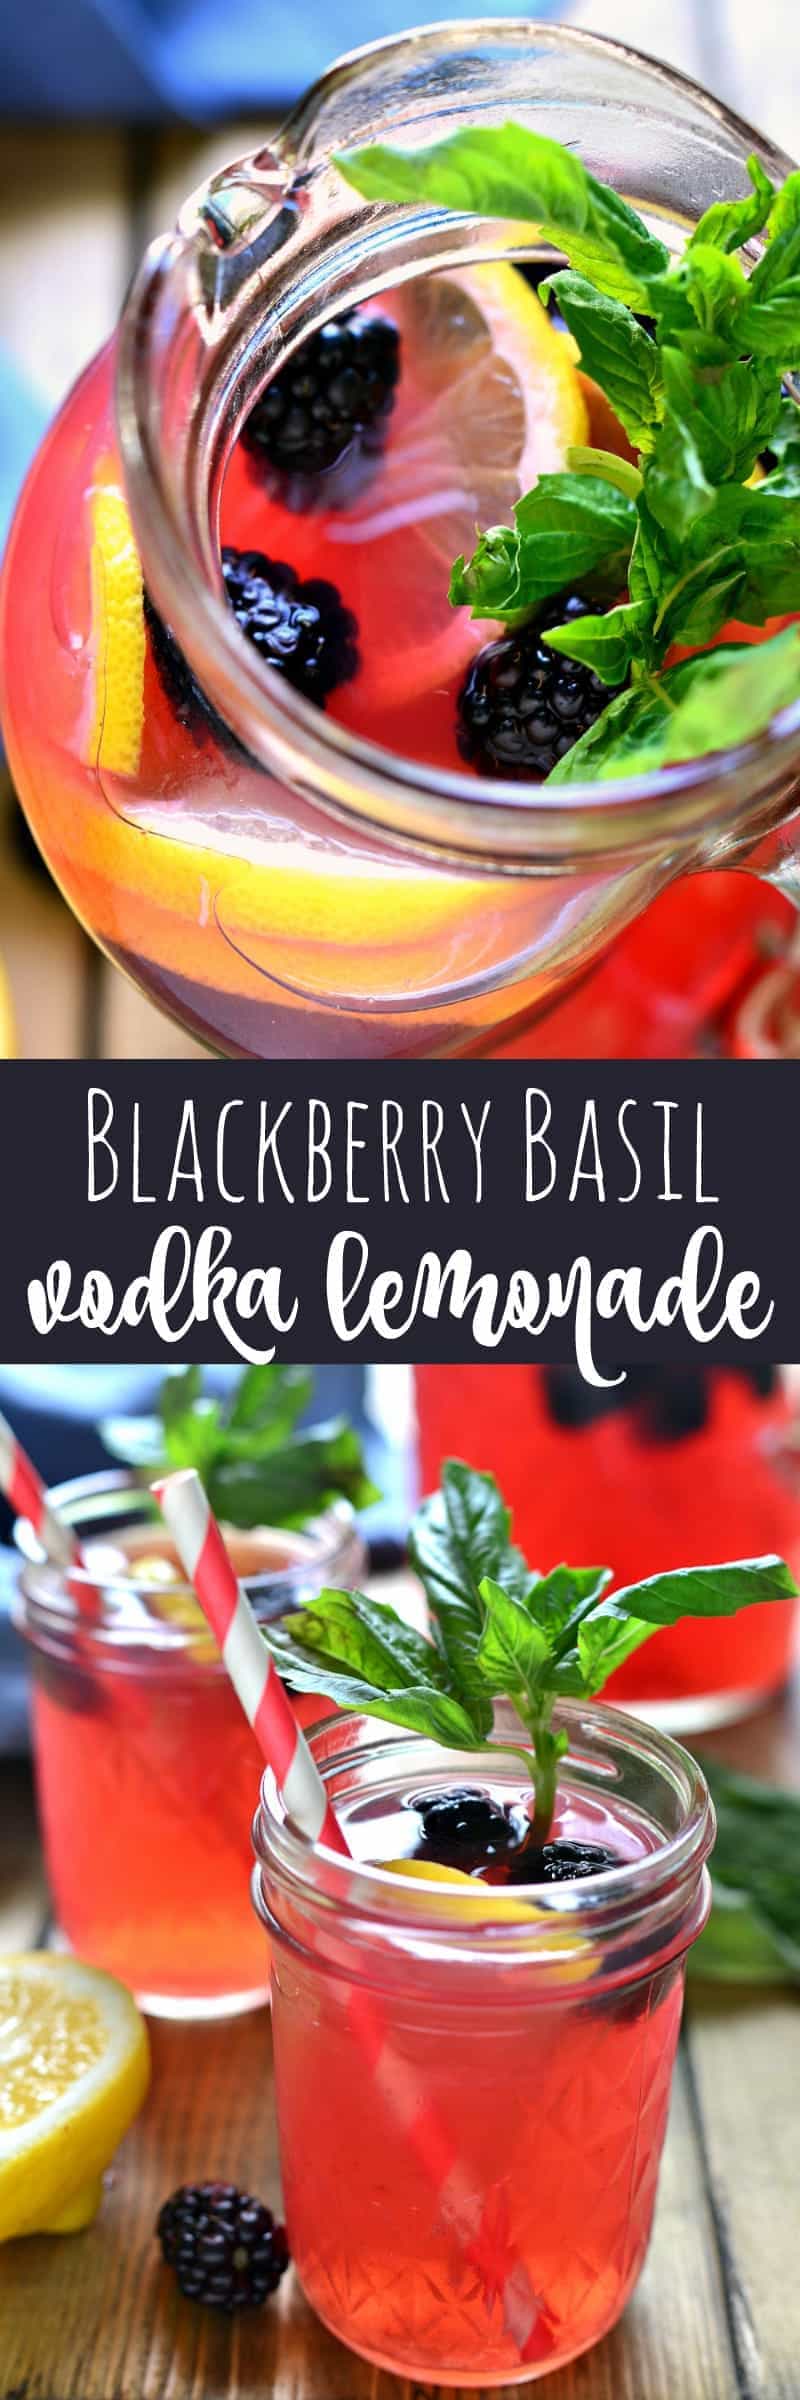 Blackberry Basil Vodka Lemonade combines sweet, tart lemonade with the delicious flavors of blackberry and basil in a refreshing cocktail that's perfect for summer!